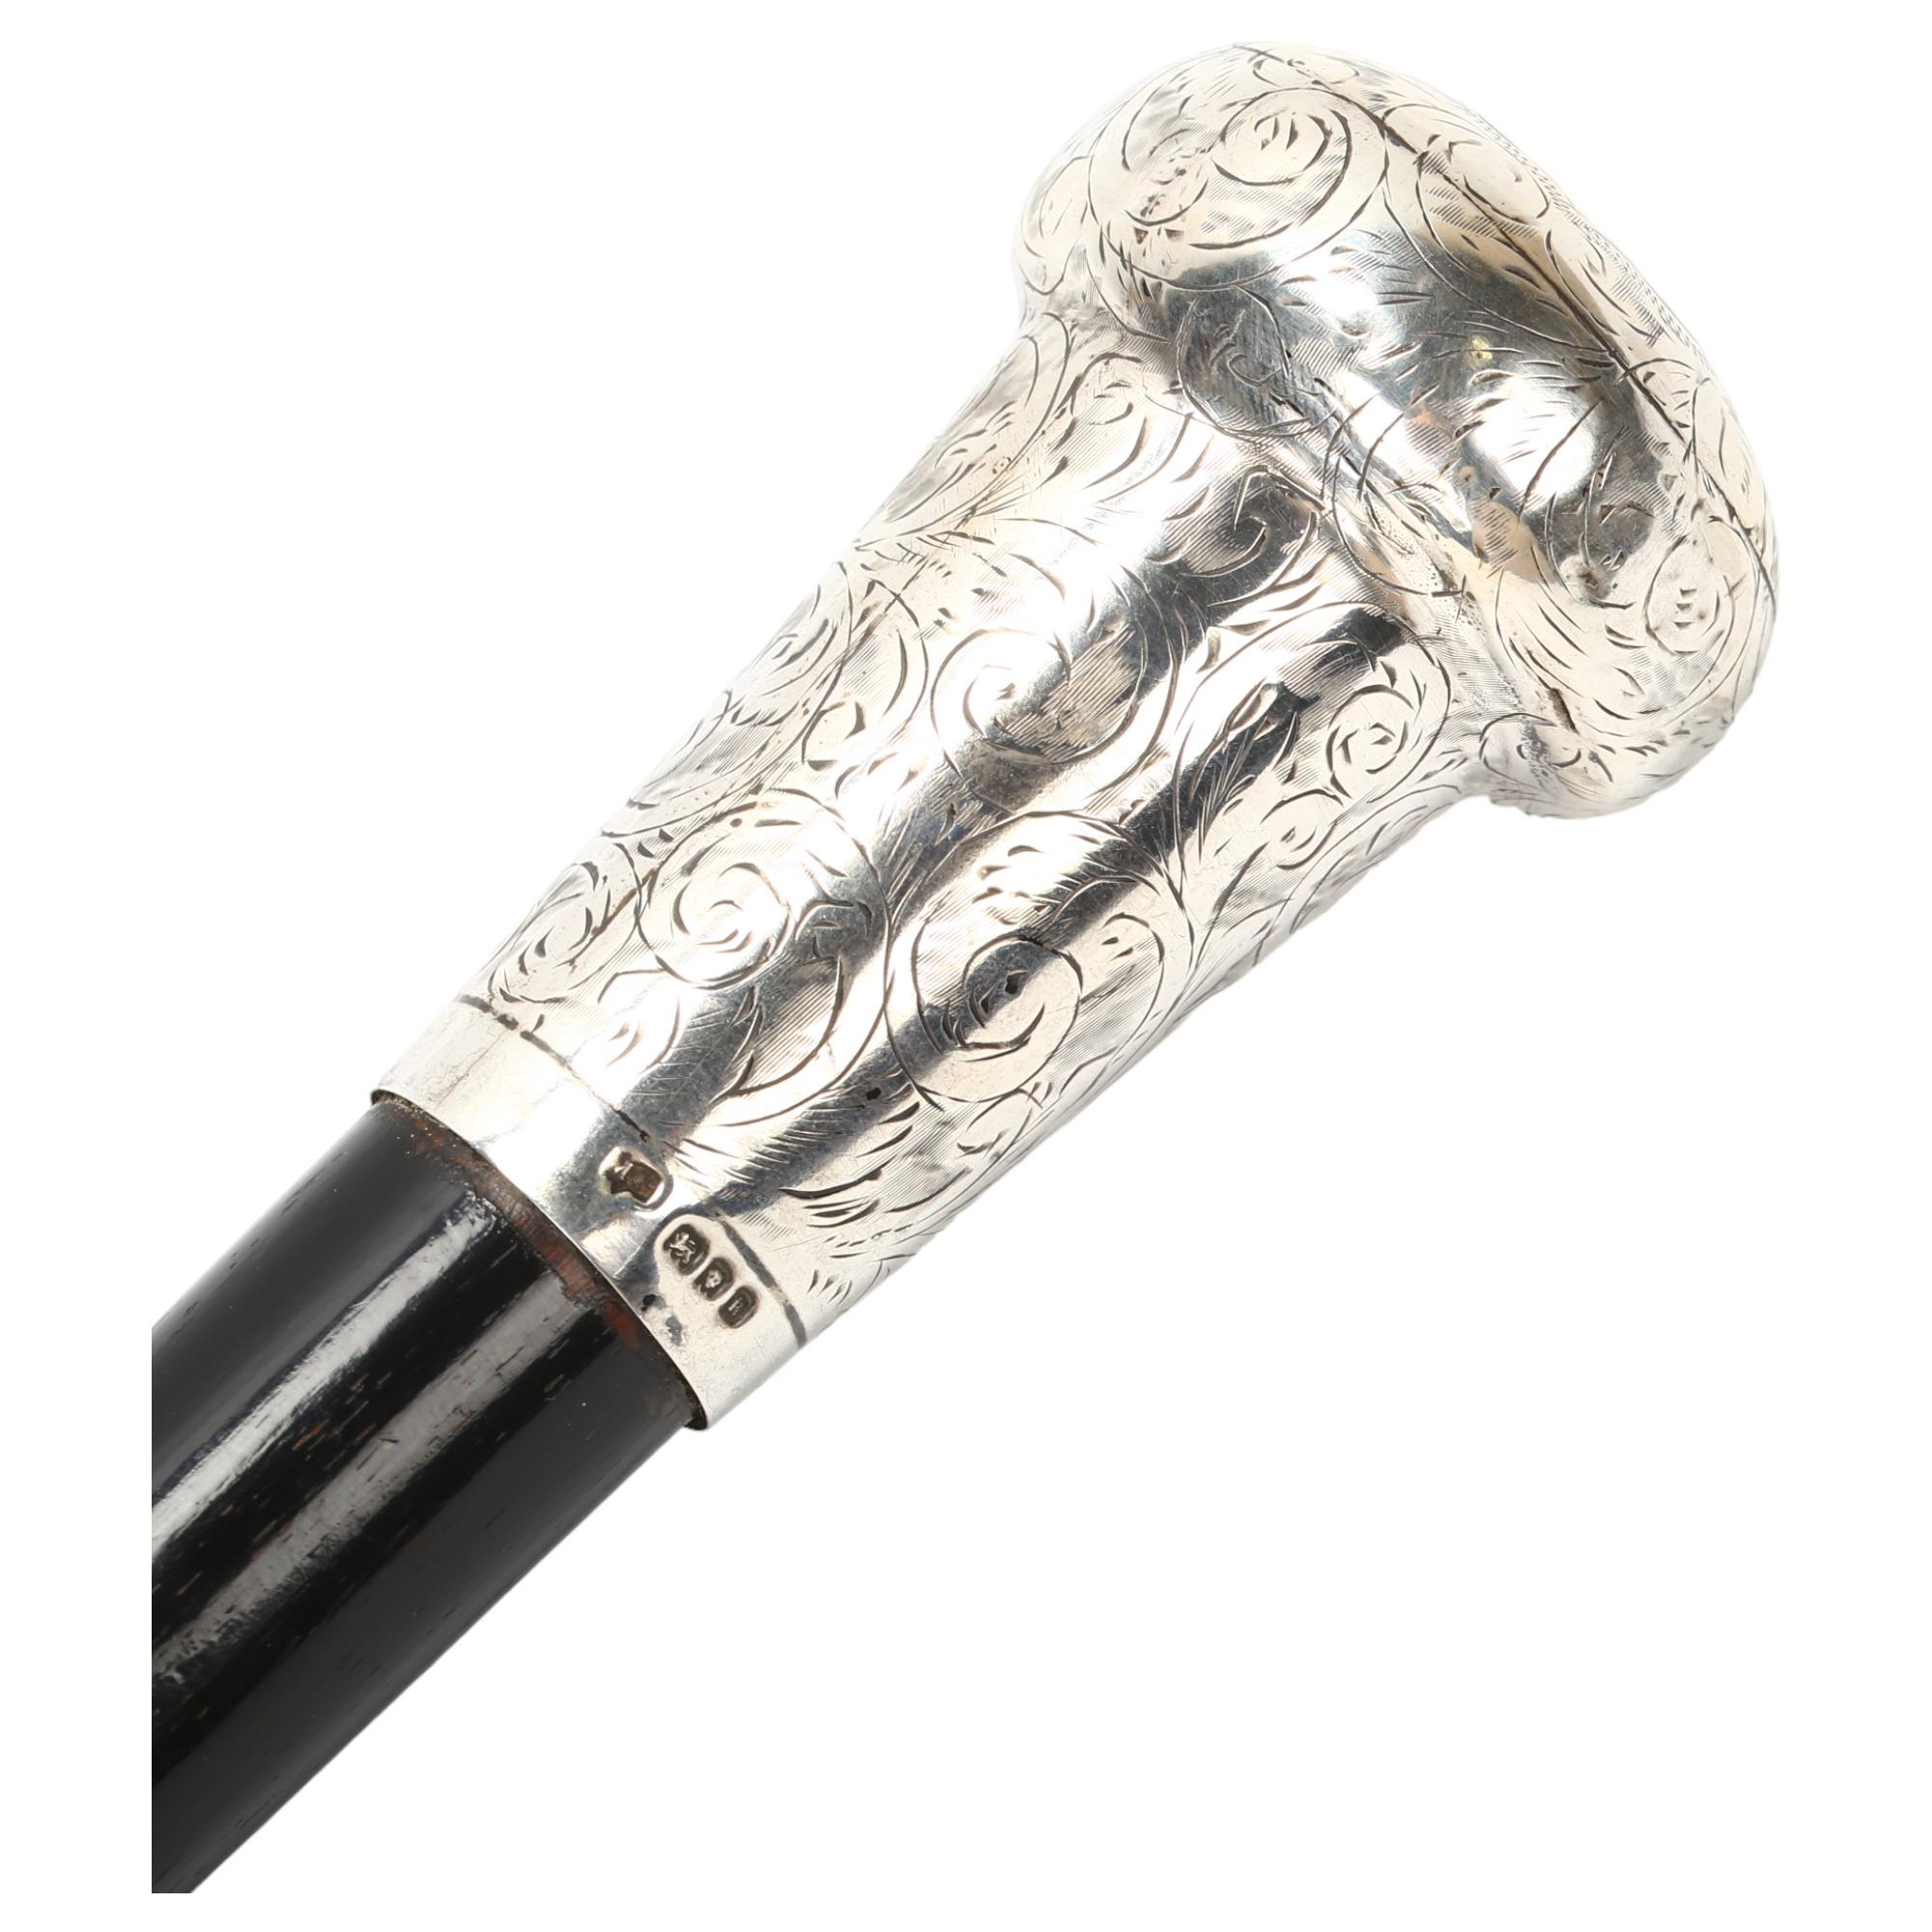 An Ebony walking cane with large hand engraved silver top, hallmarked London 1925/6, length 92cm